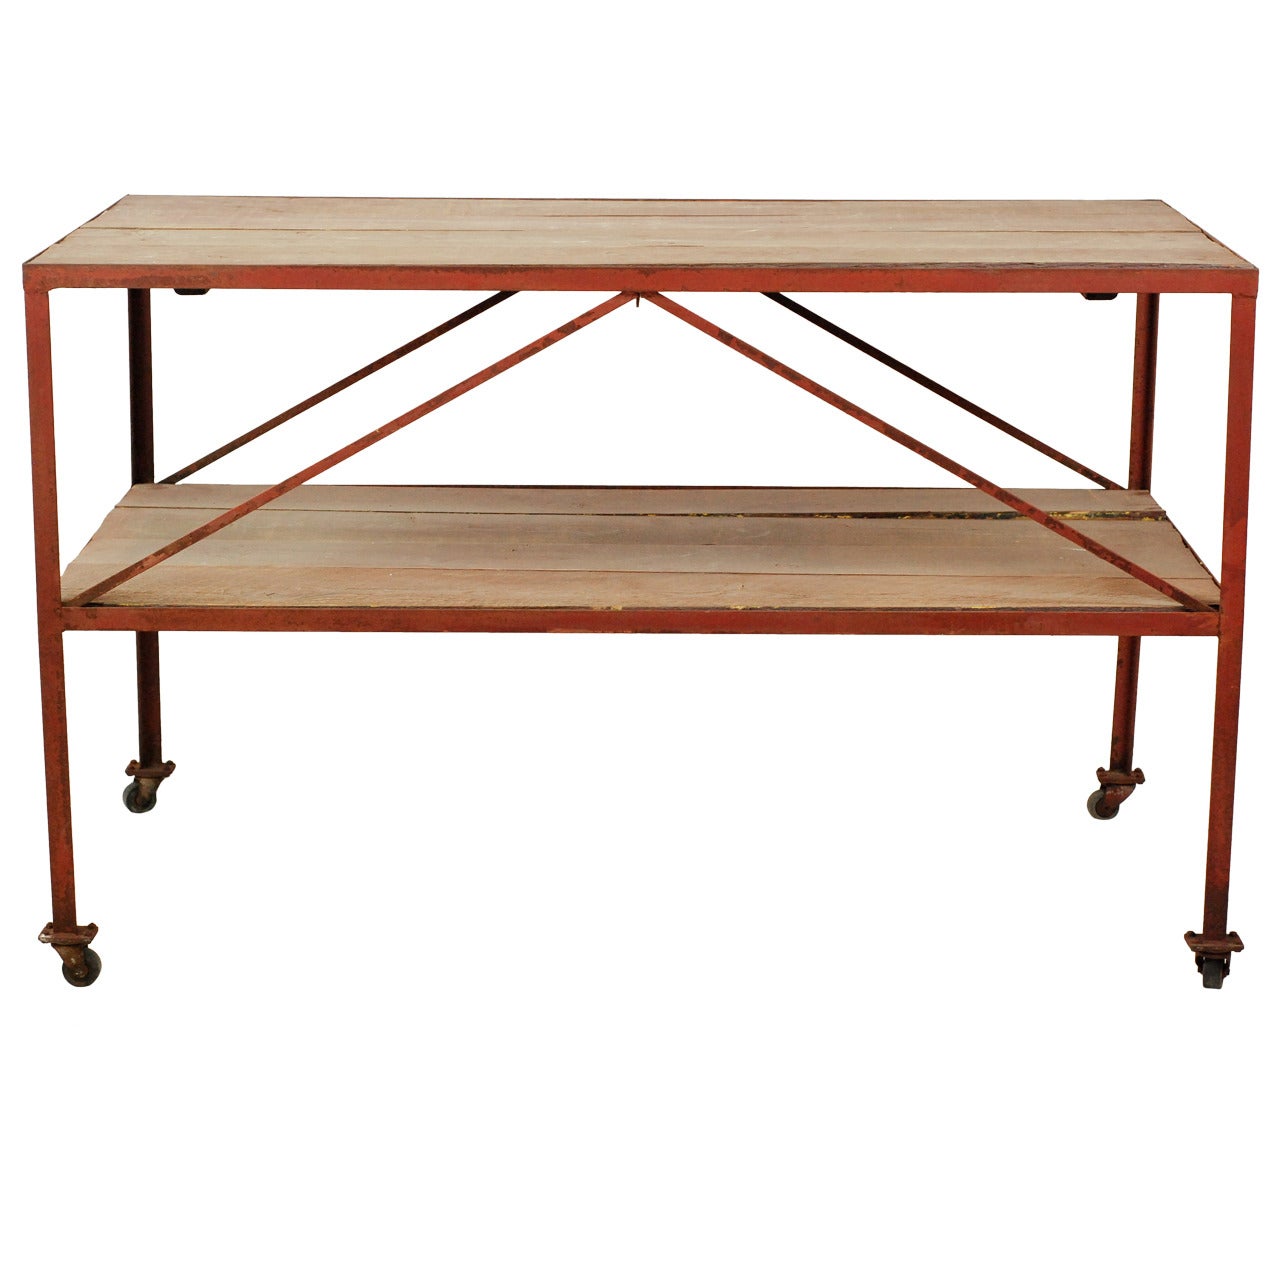 Two-Tier Iron Work Table For Sale